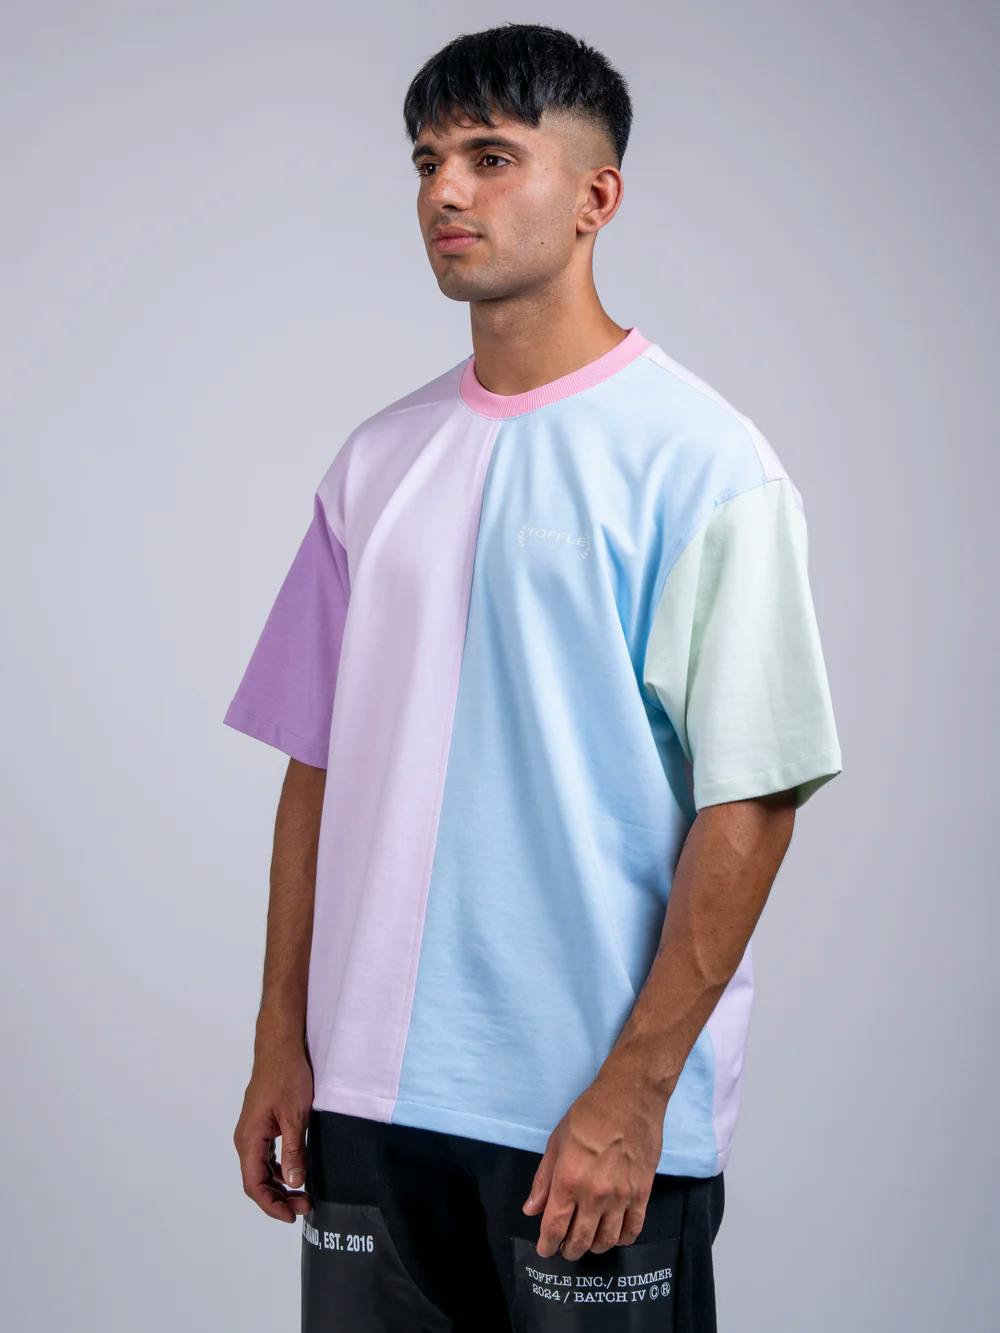 Colour Block T-shirt, a product by TOFFLE